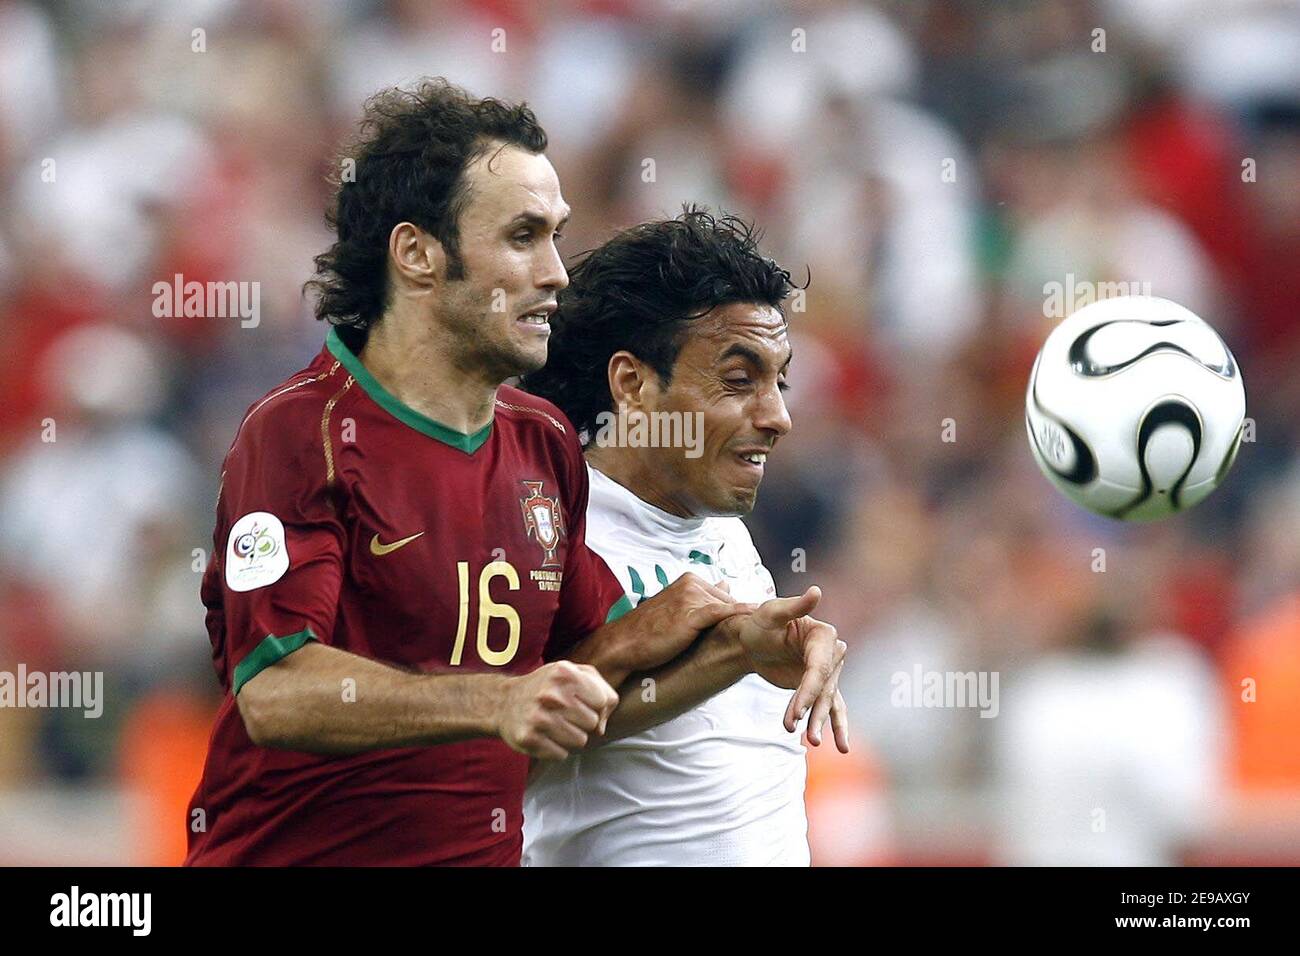 Iran's Rasoul Khatibi and Portugal's Ricardo Carvalho battle for the ball during the World Cup 2006, Portugal vs Iran at the Fifa World Cup Stadium in Frankfurt, Germany on June 17, 2006. Portugal won 2-0. Photo by Christian Liewig/ABACAPRESS.COM Stock Photo